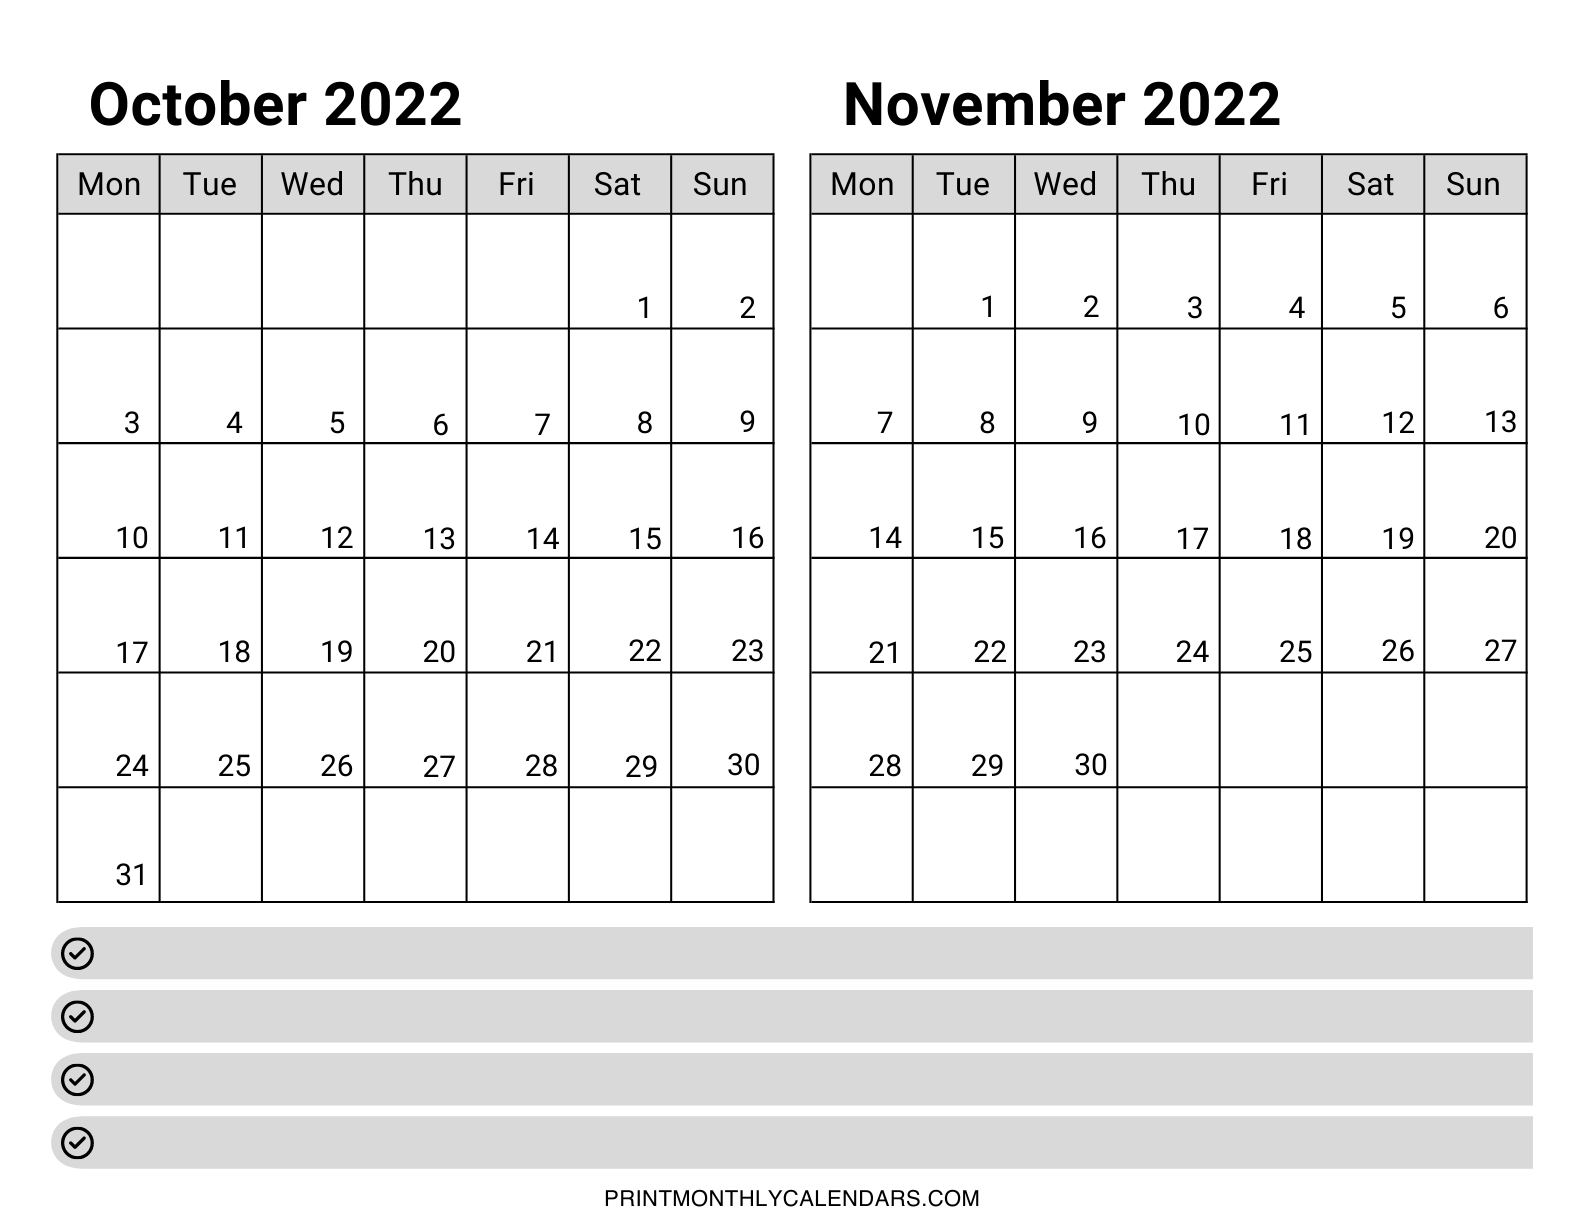 October and November 2022 notes calendar has two grids in portrait layout. Weekdays are starting from Monday instead of Sunday.